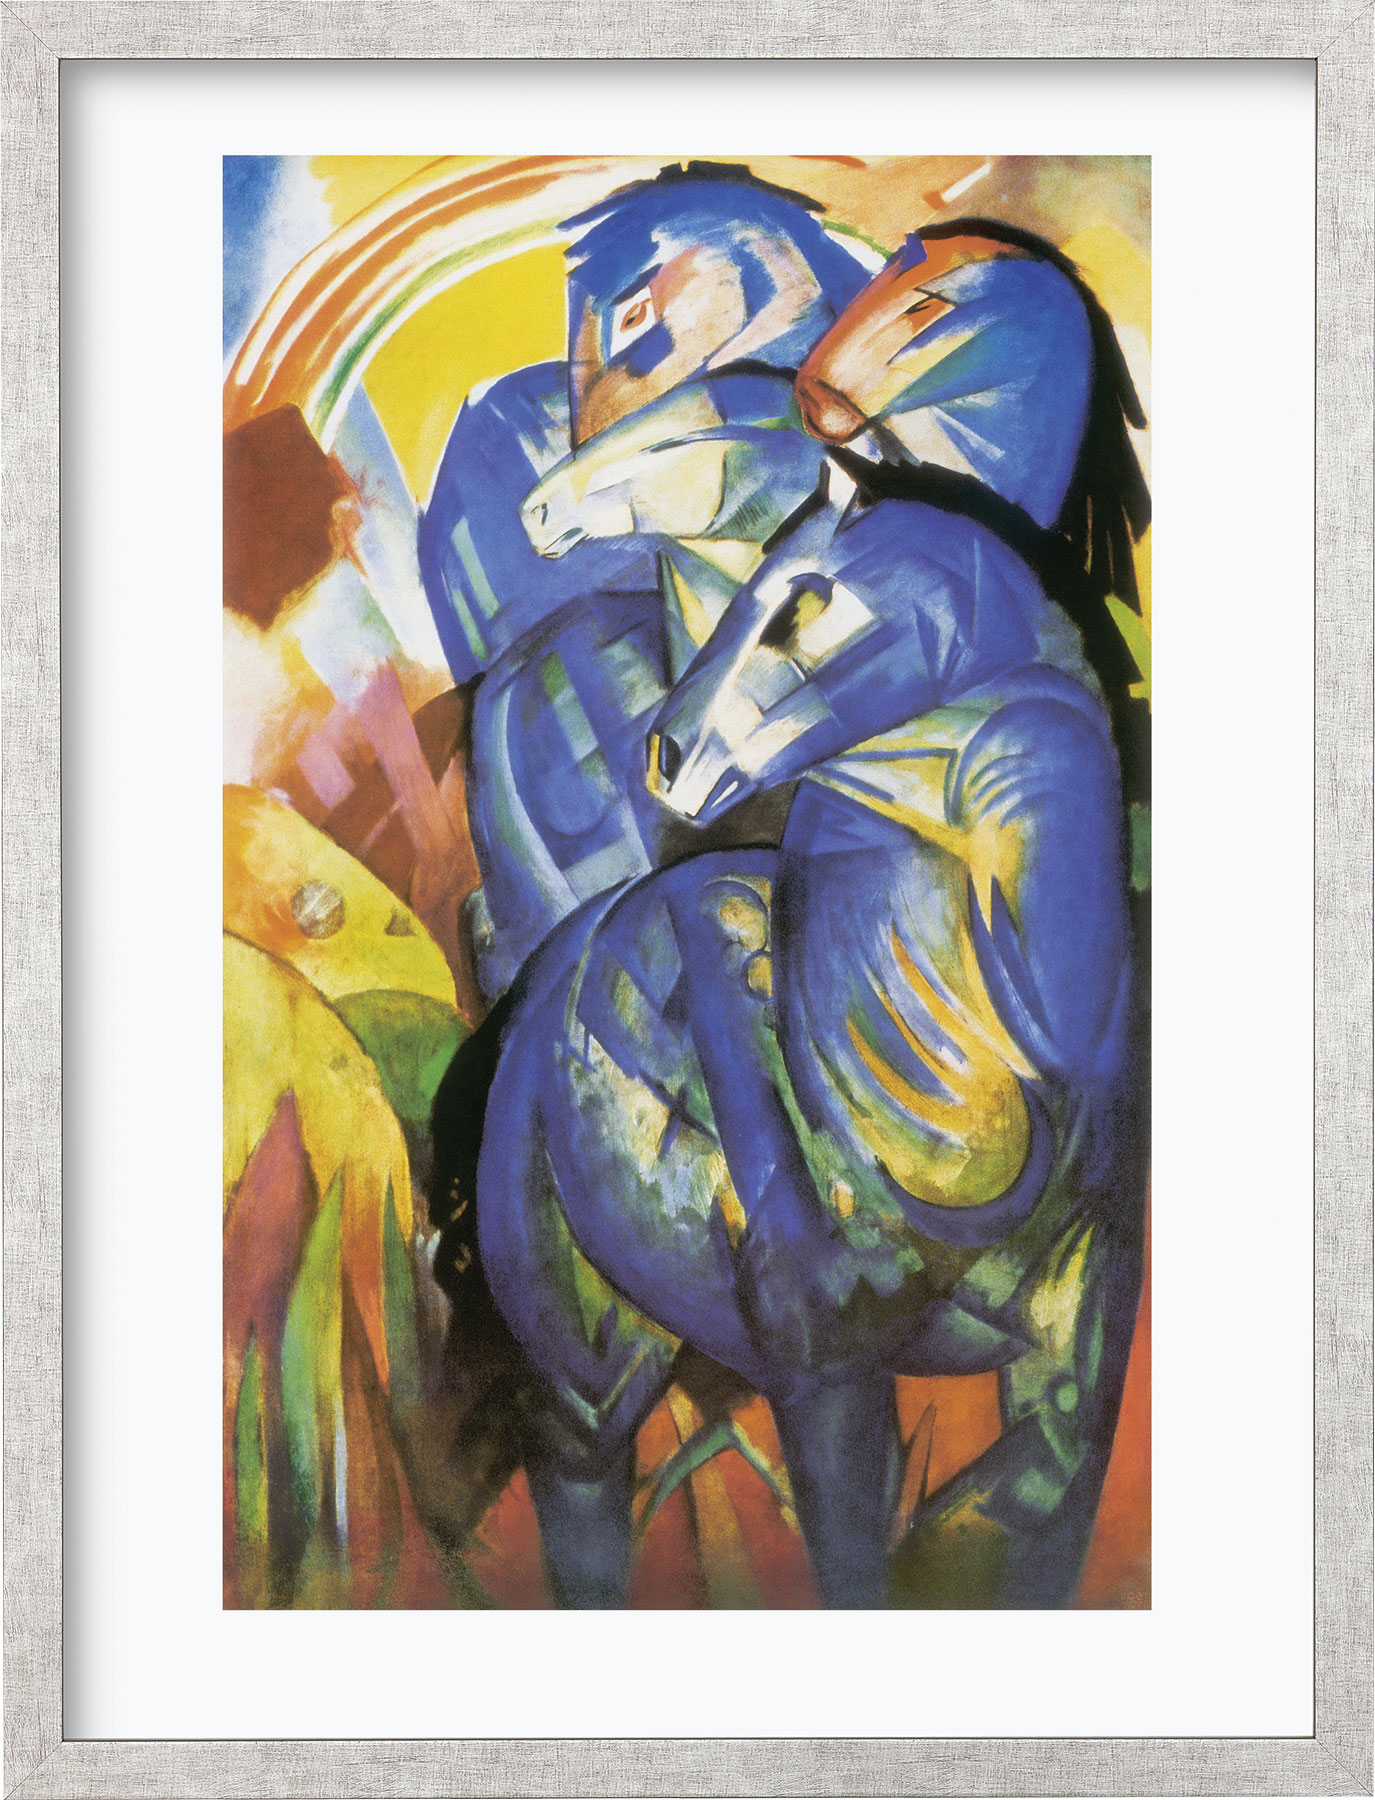 Picture "Tower of the Blue Horses" (1913), framed by Franz Marc